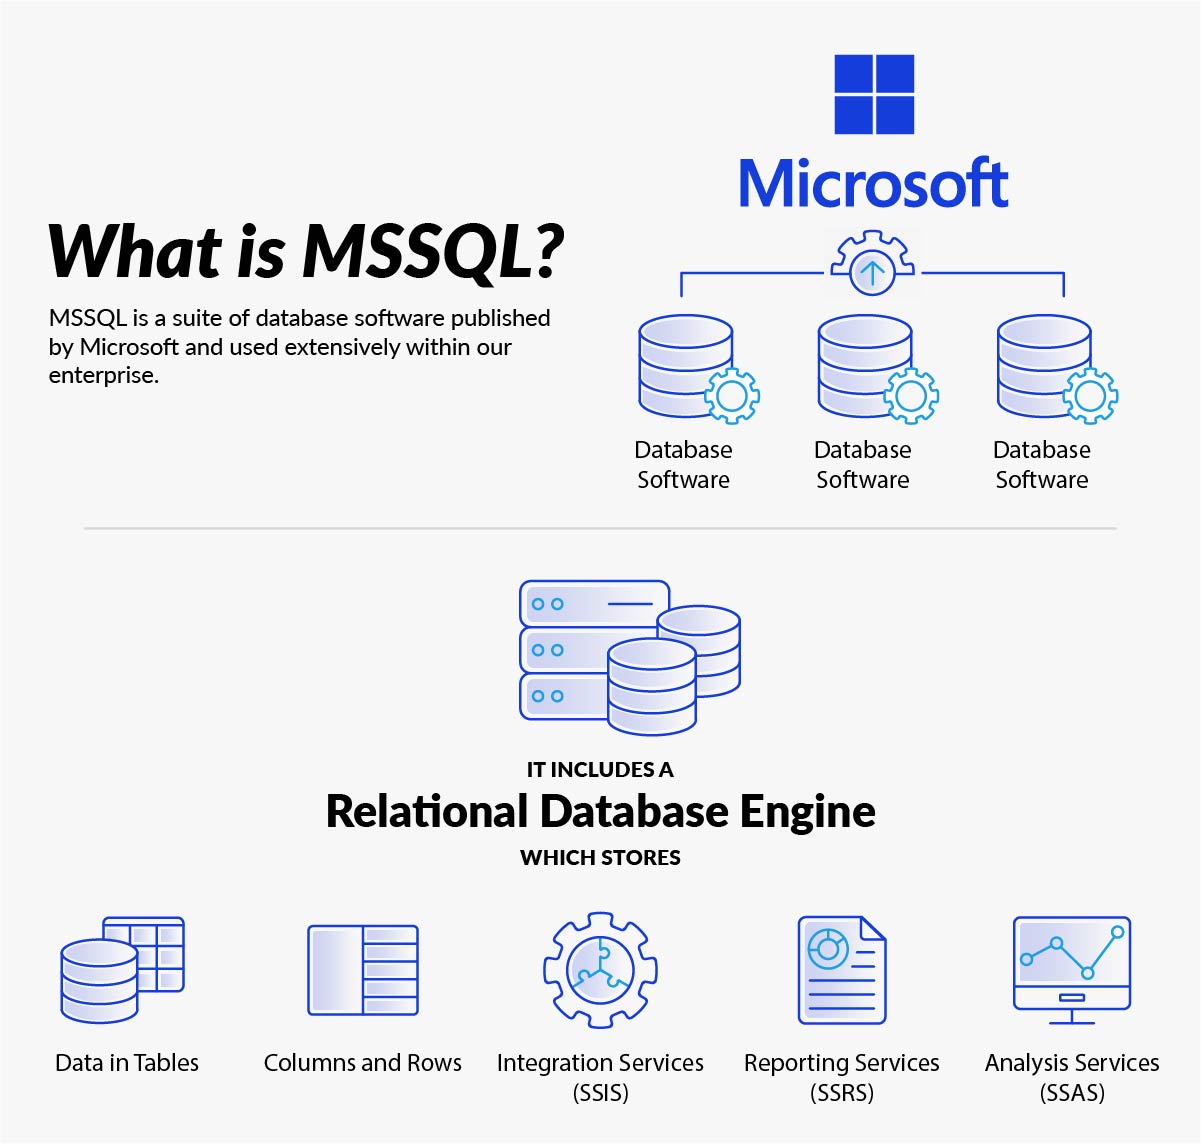 What is MSSQL